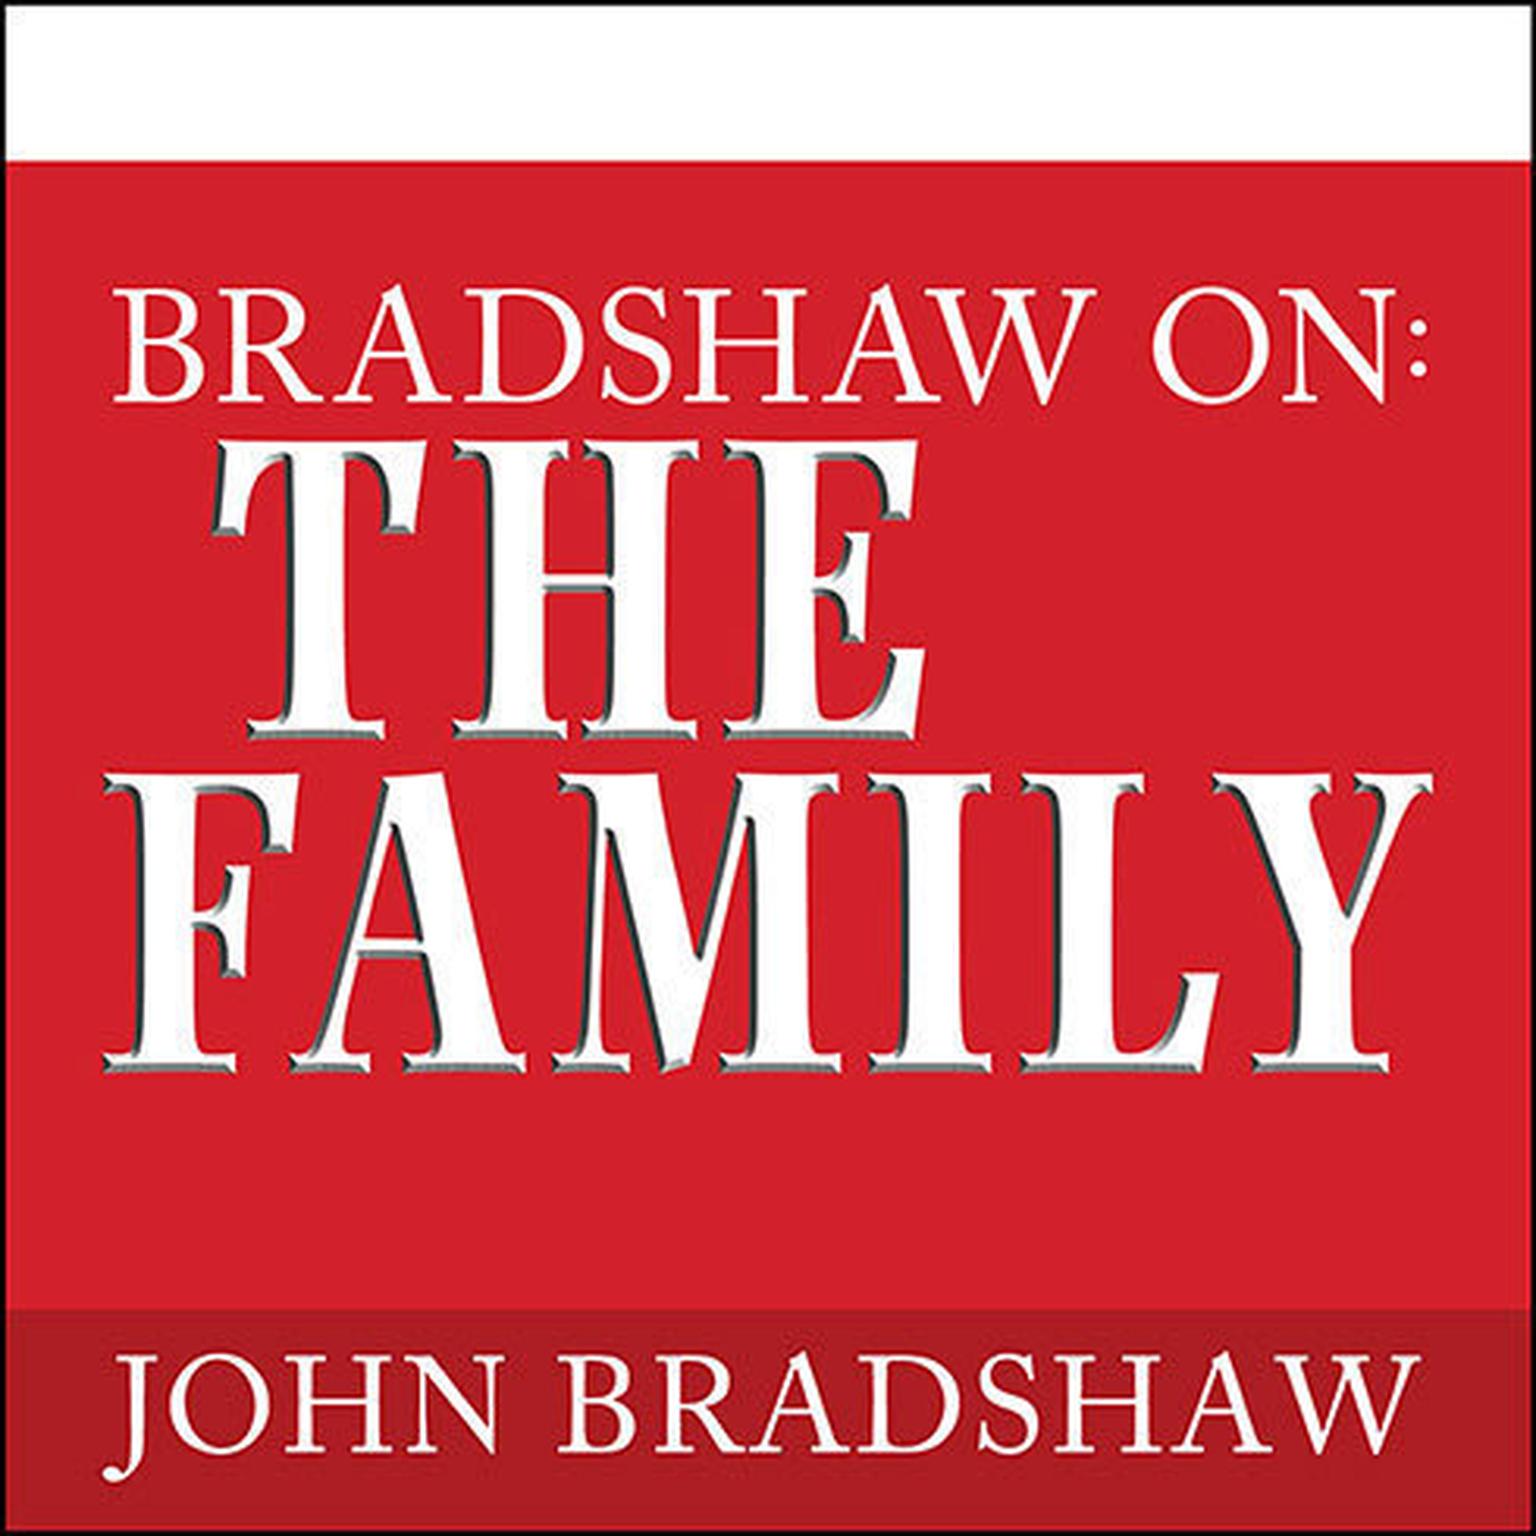 Bradshaw On: The Family: A New Way of Creating Solid Self-Esteem Audiobook, by John Bradshaw